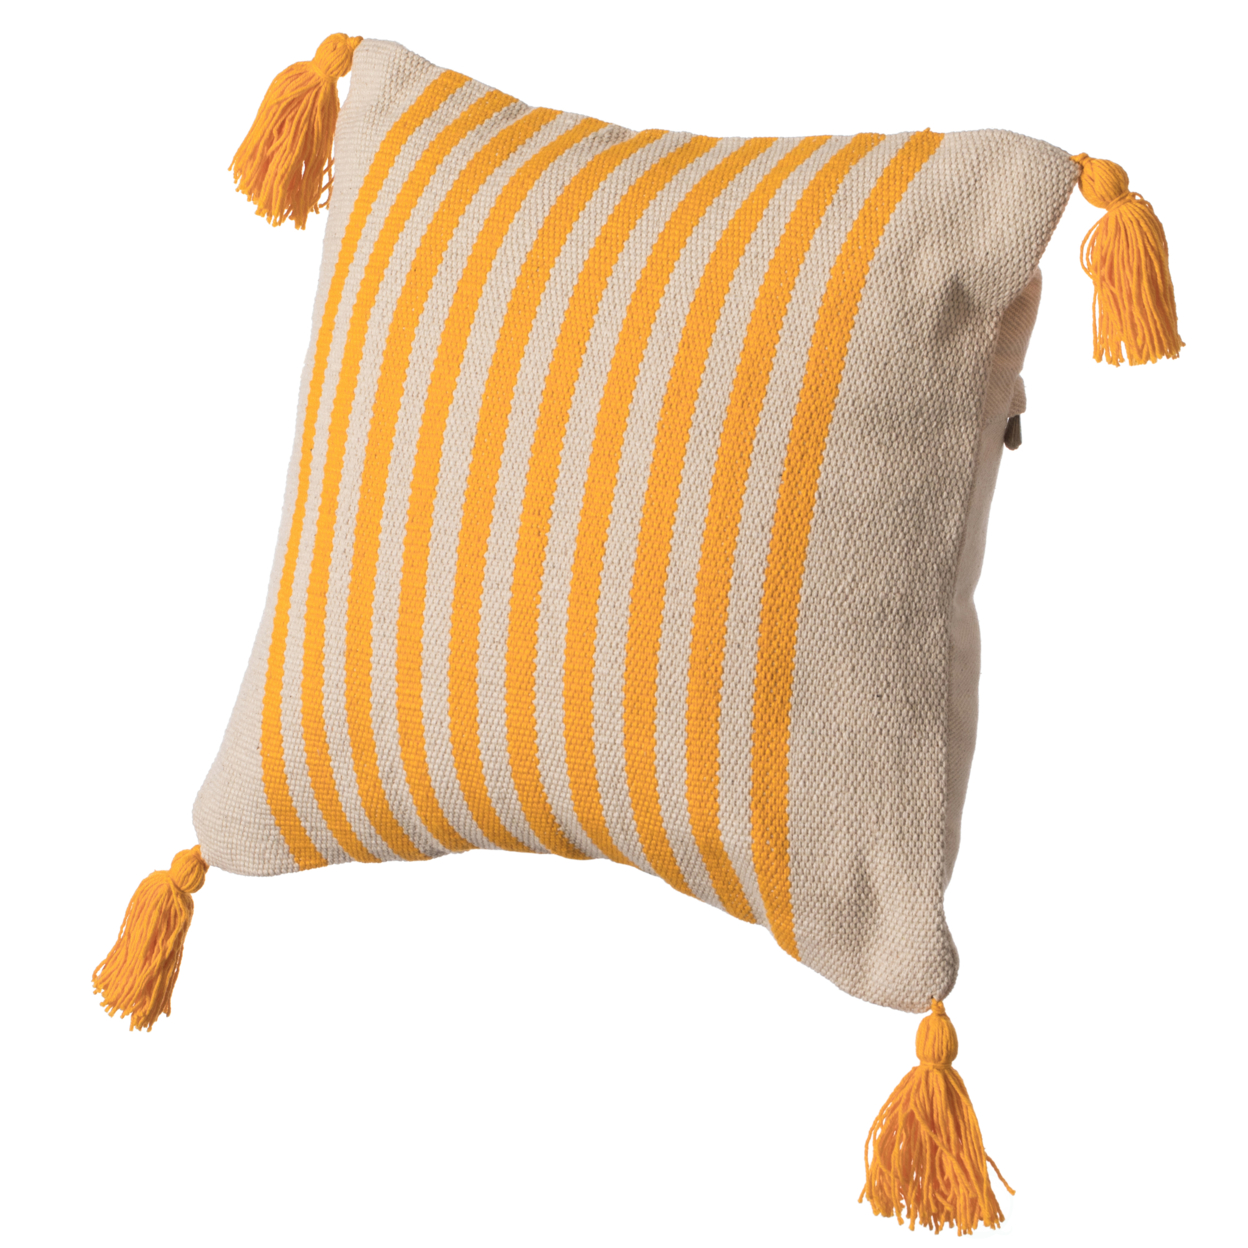 16" Handwoven Cotton Throw Pillow Cover with Striped Lines, Black - yellow with cushion